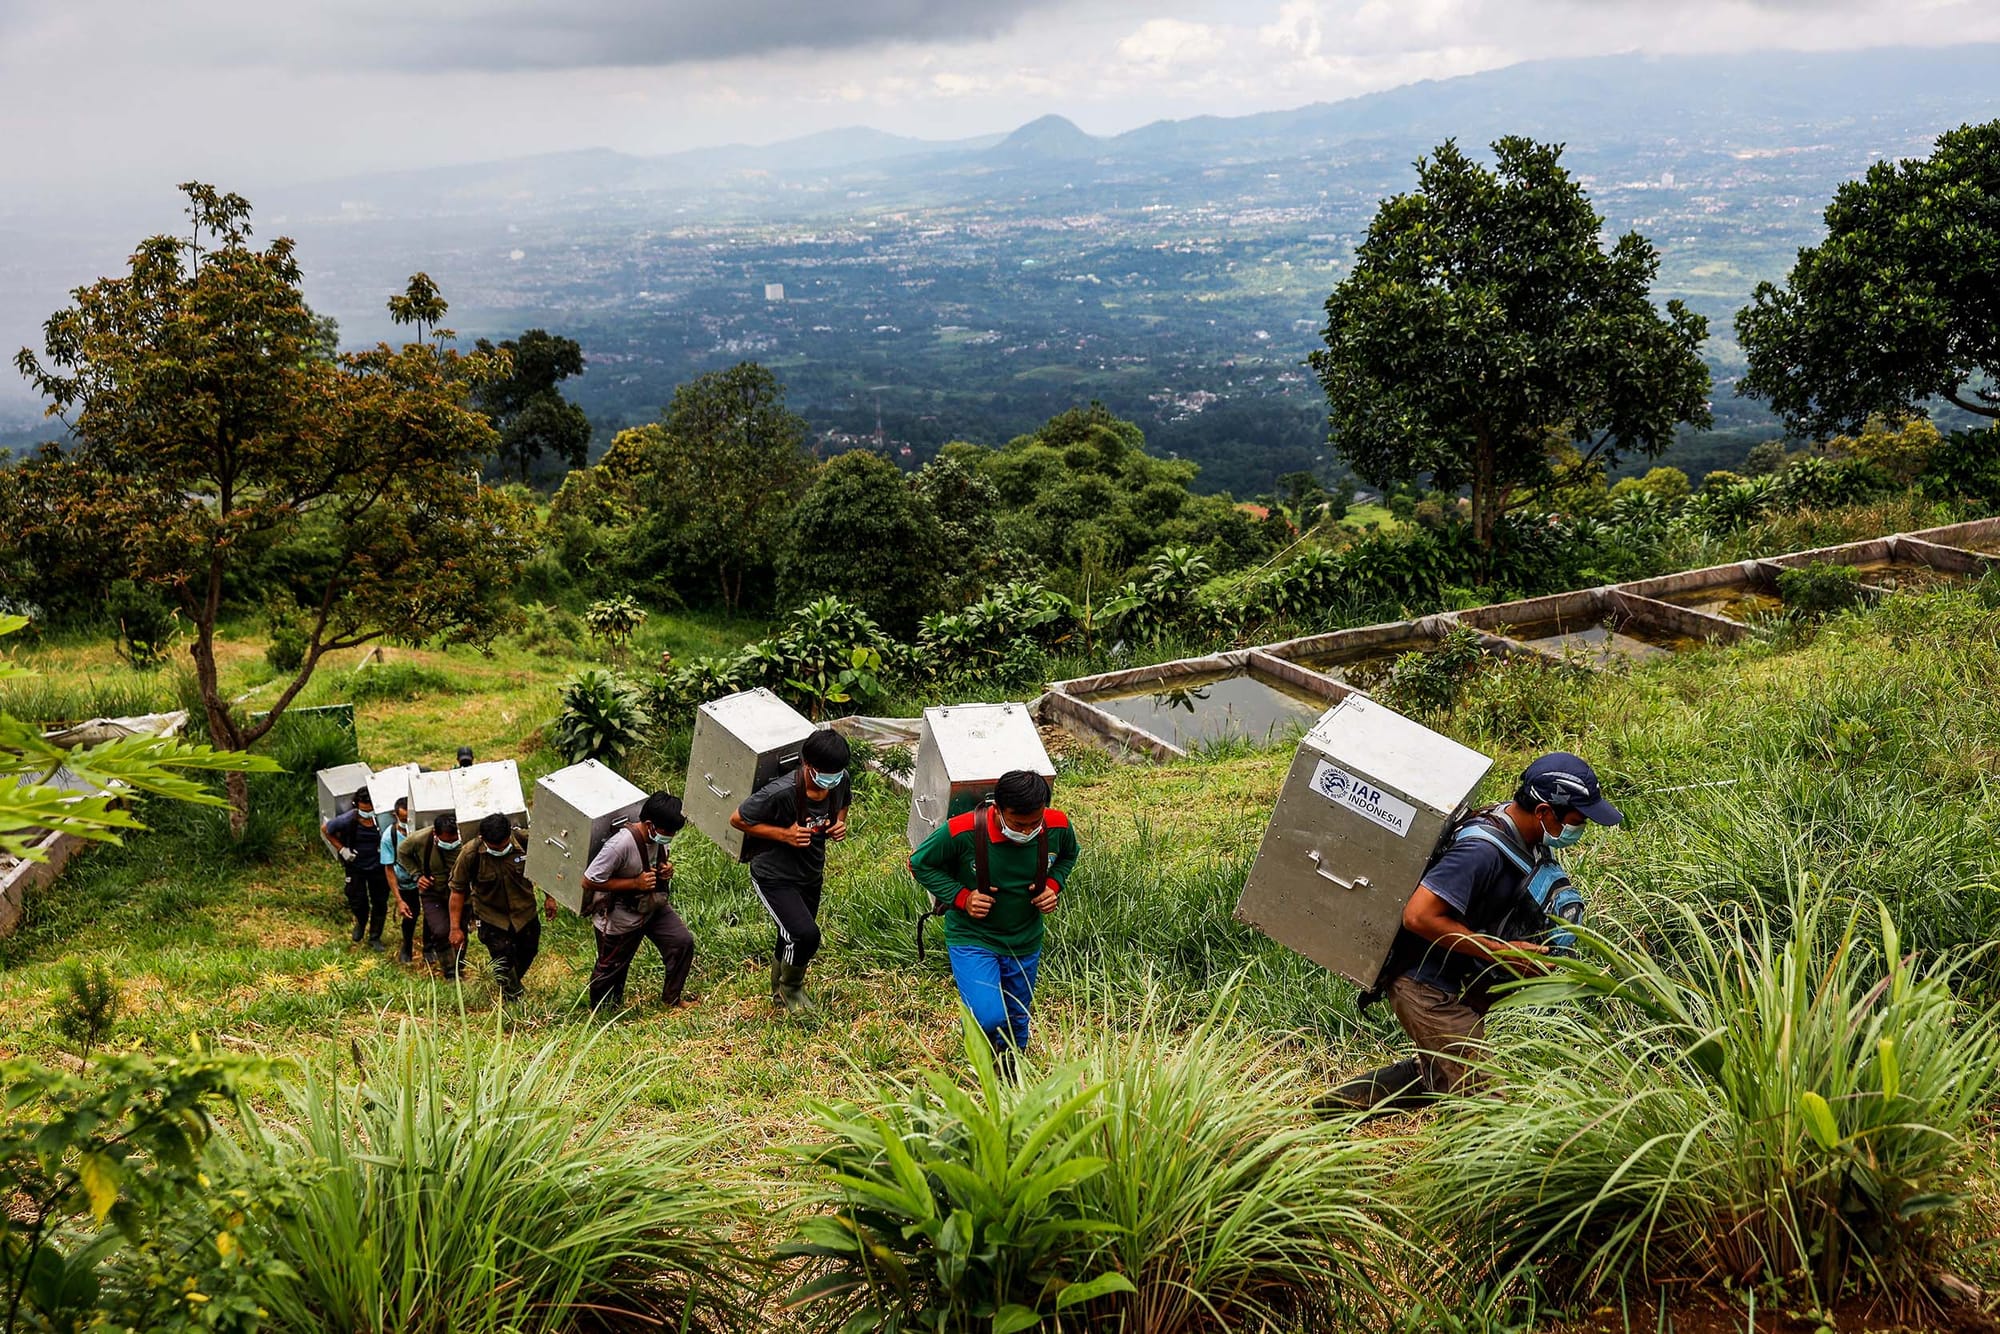 A row of people hiking up a hill with metal boxes on their backs, with a landscape behind them